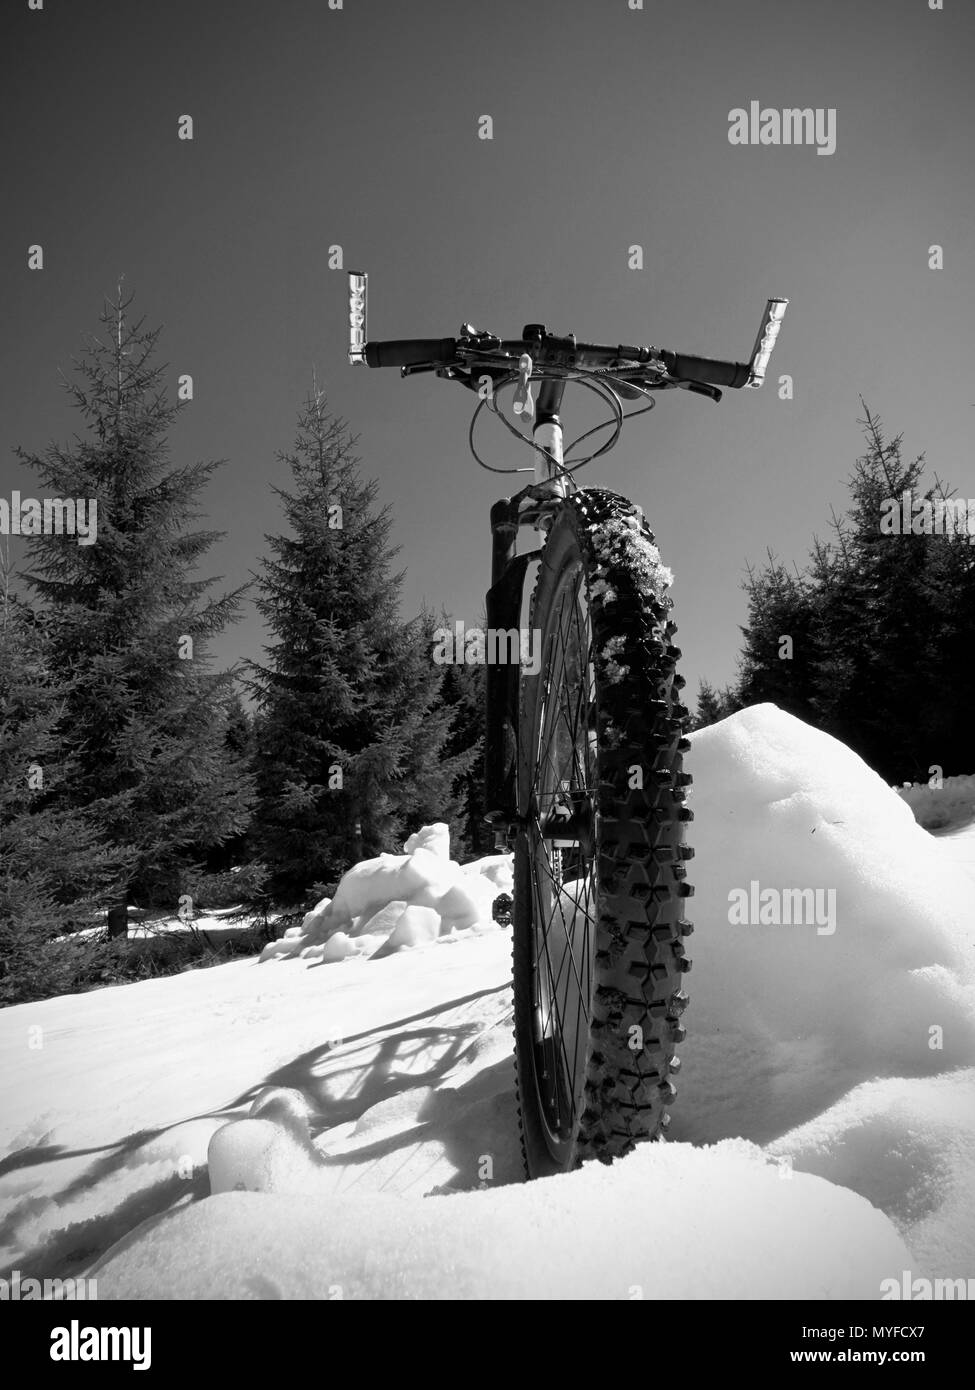 Close wide view to mountain bike stays in snow. Winter snowy mountains with road between trees. Stock Photo